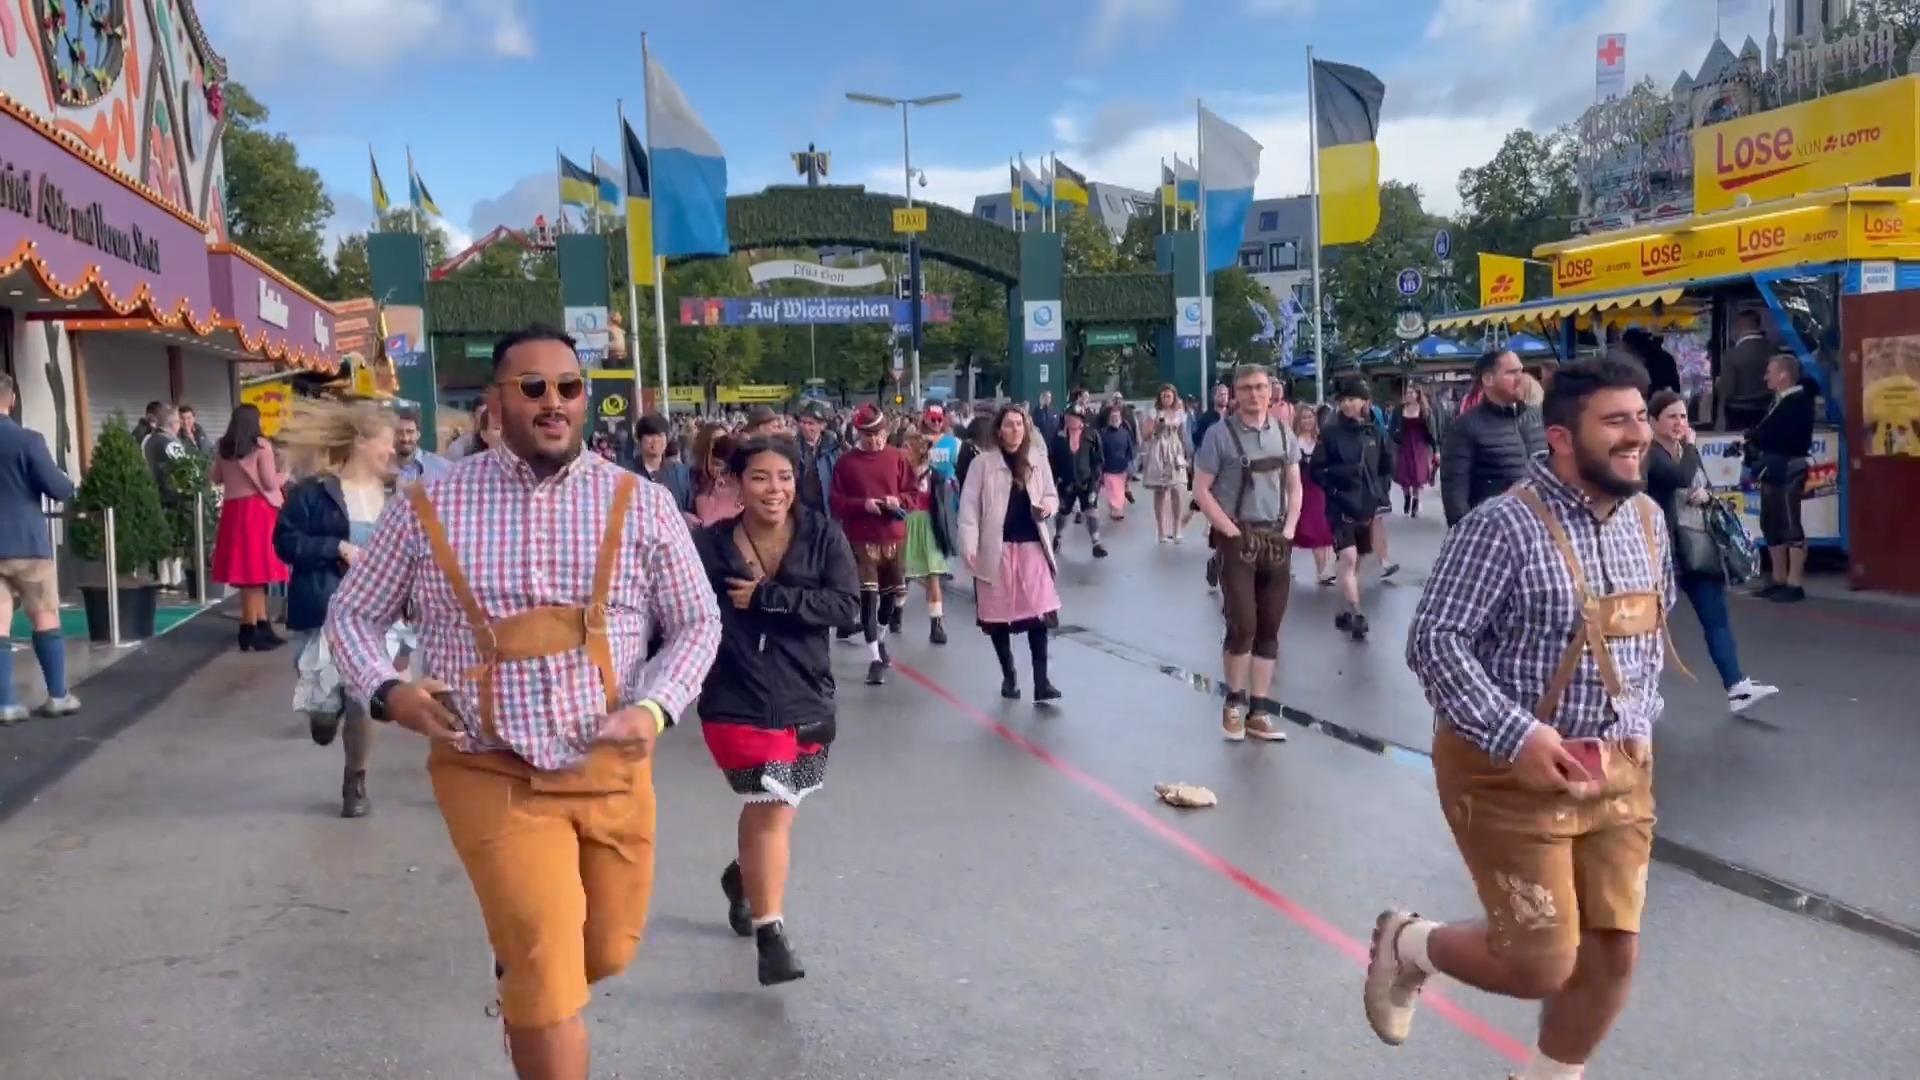 Oktoberfest 2022 Starts With A Rush Of Visitors After A 2-Year Forced Break